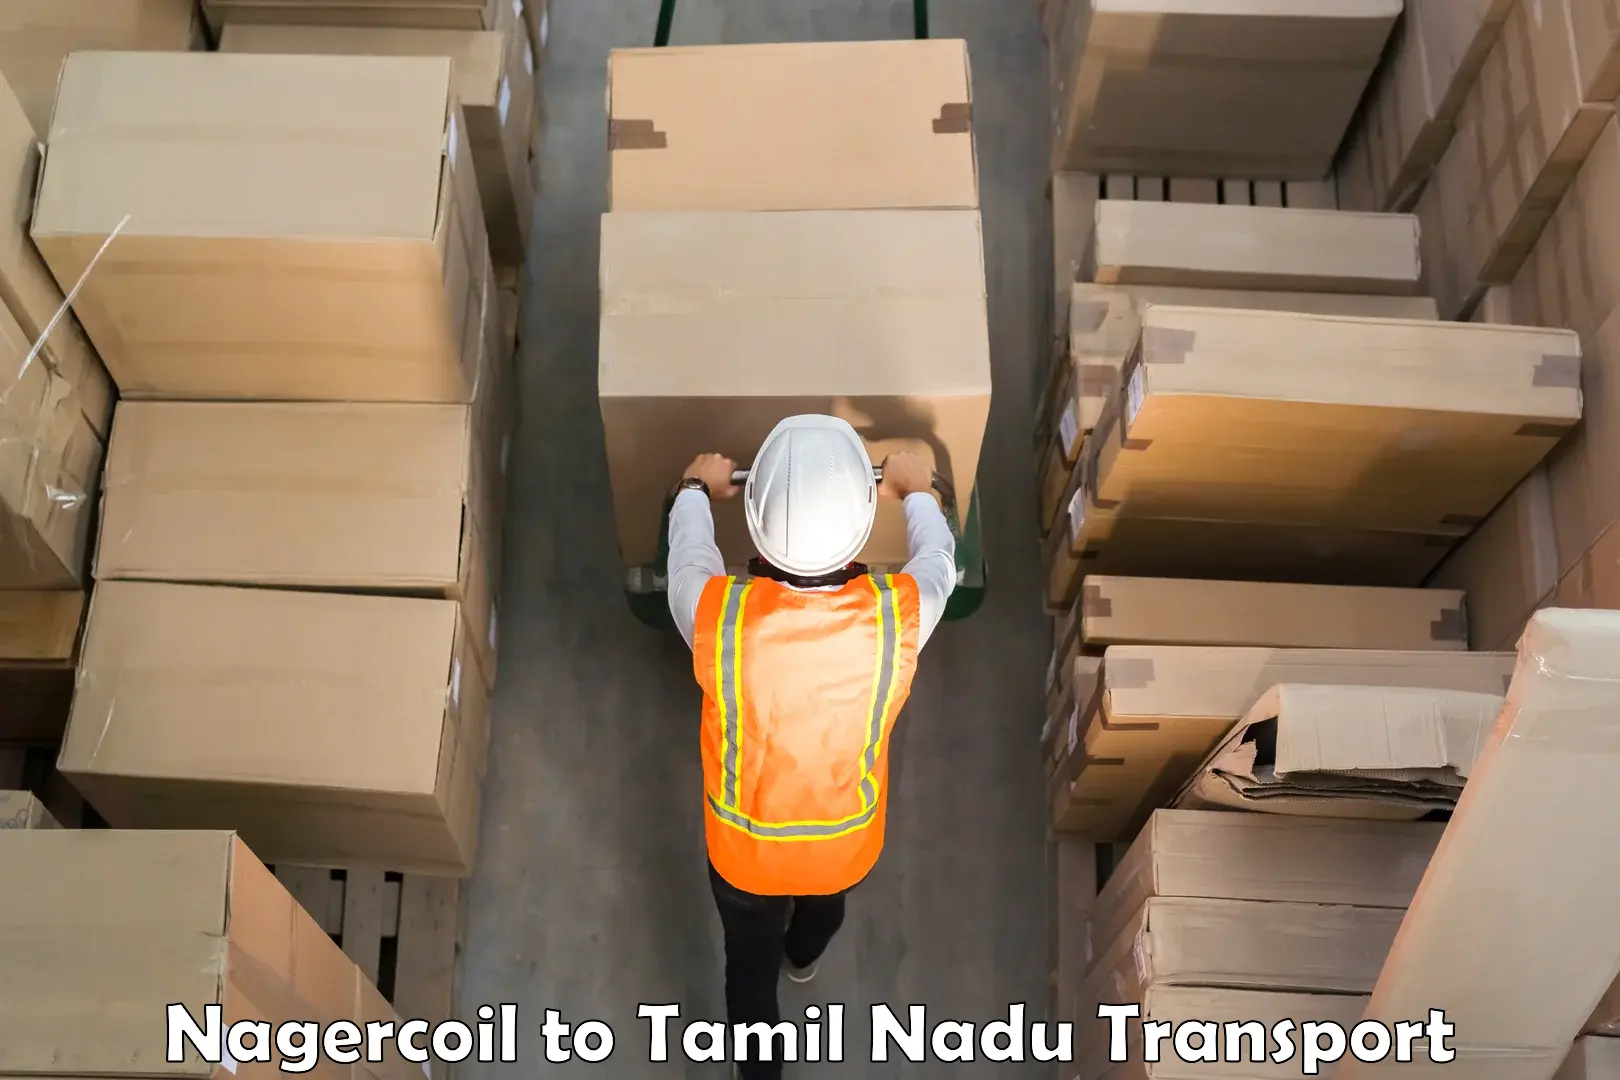 Parcel transport services Nagercoil to Padi